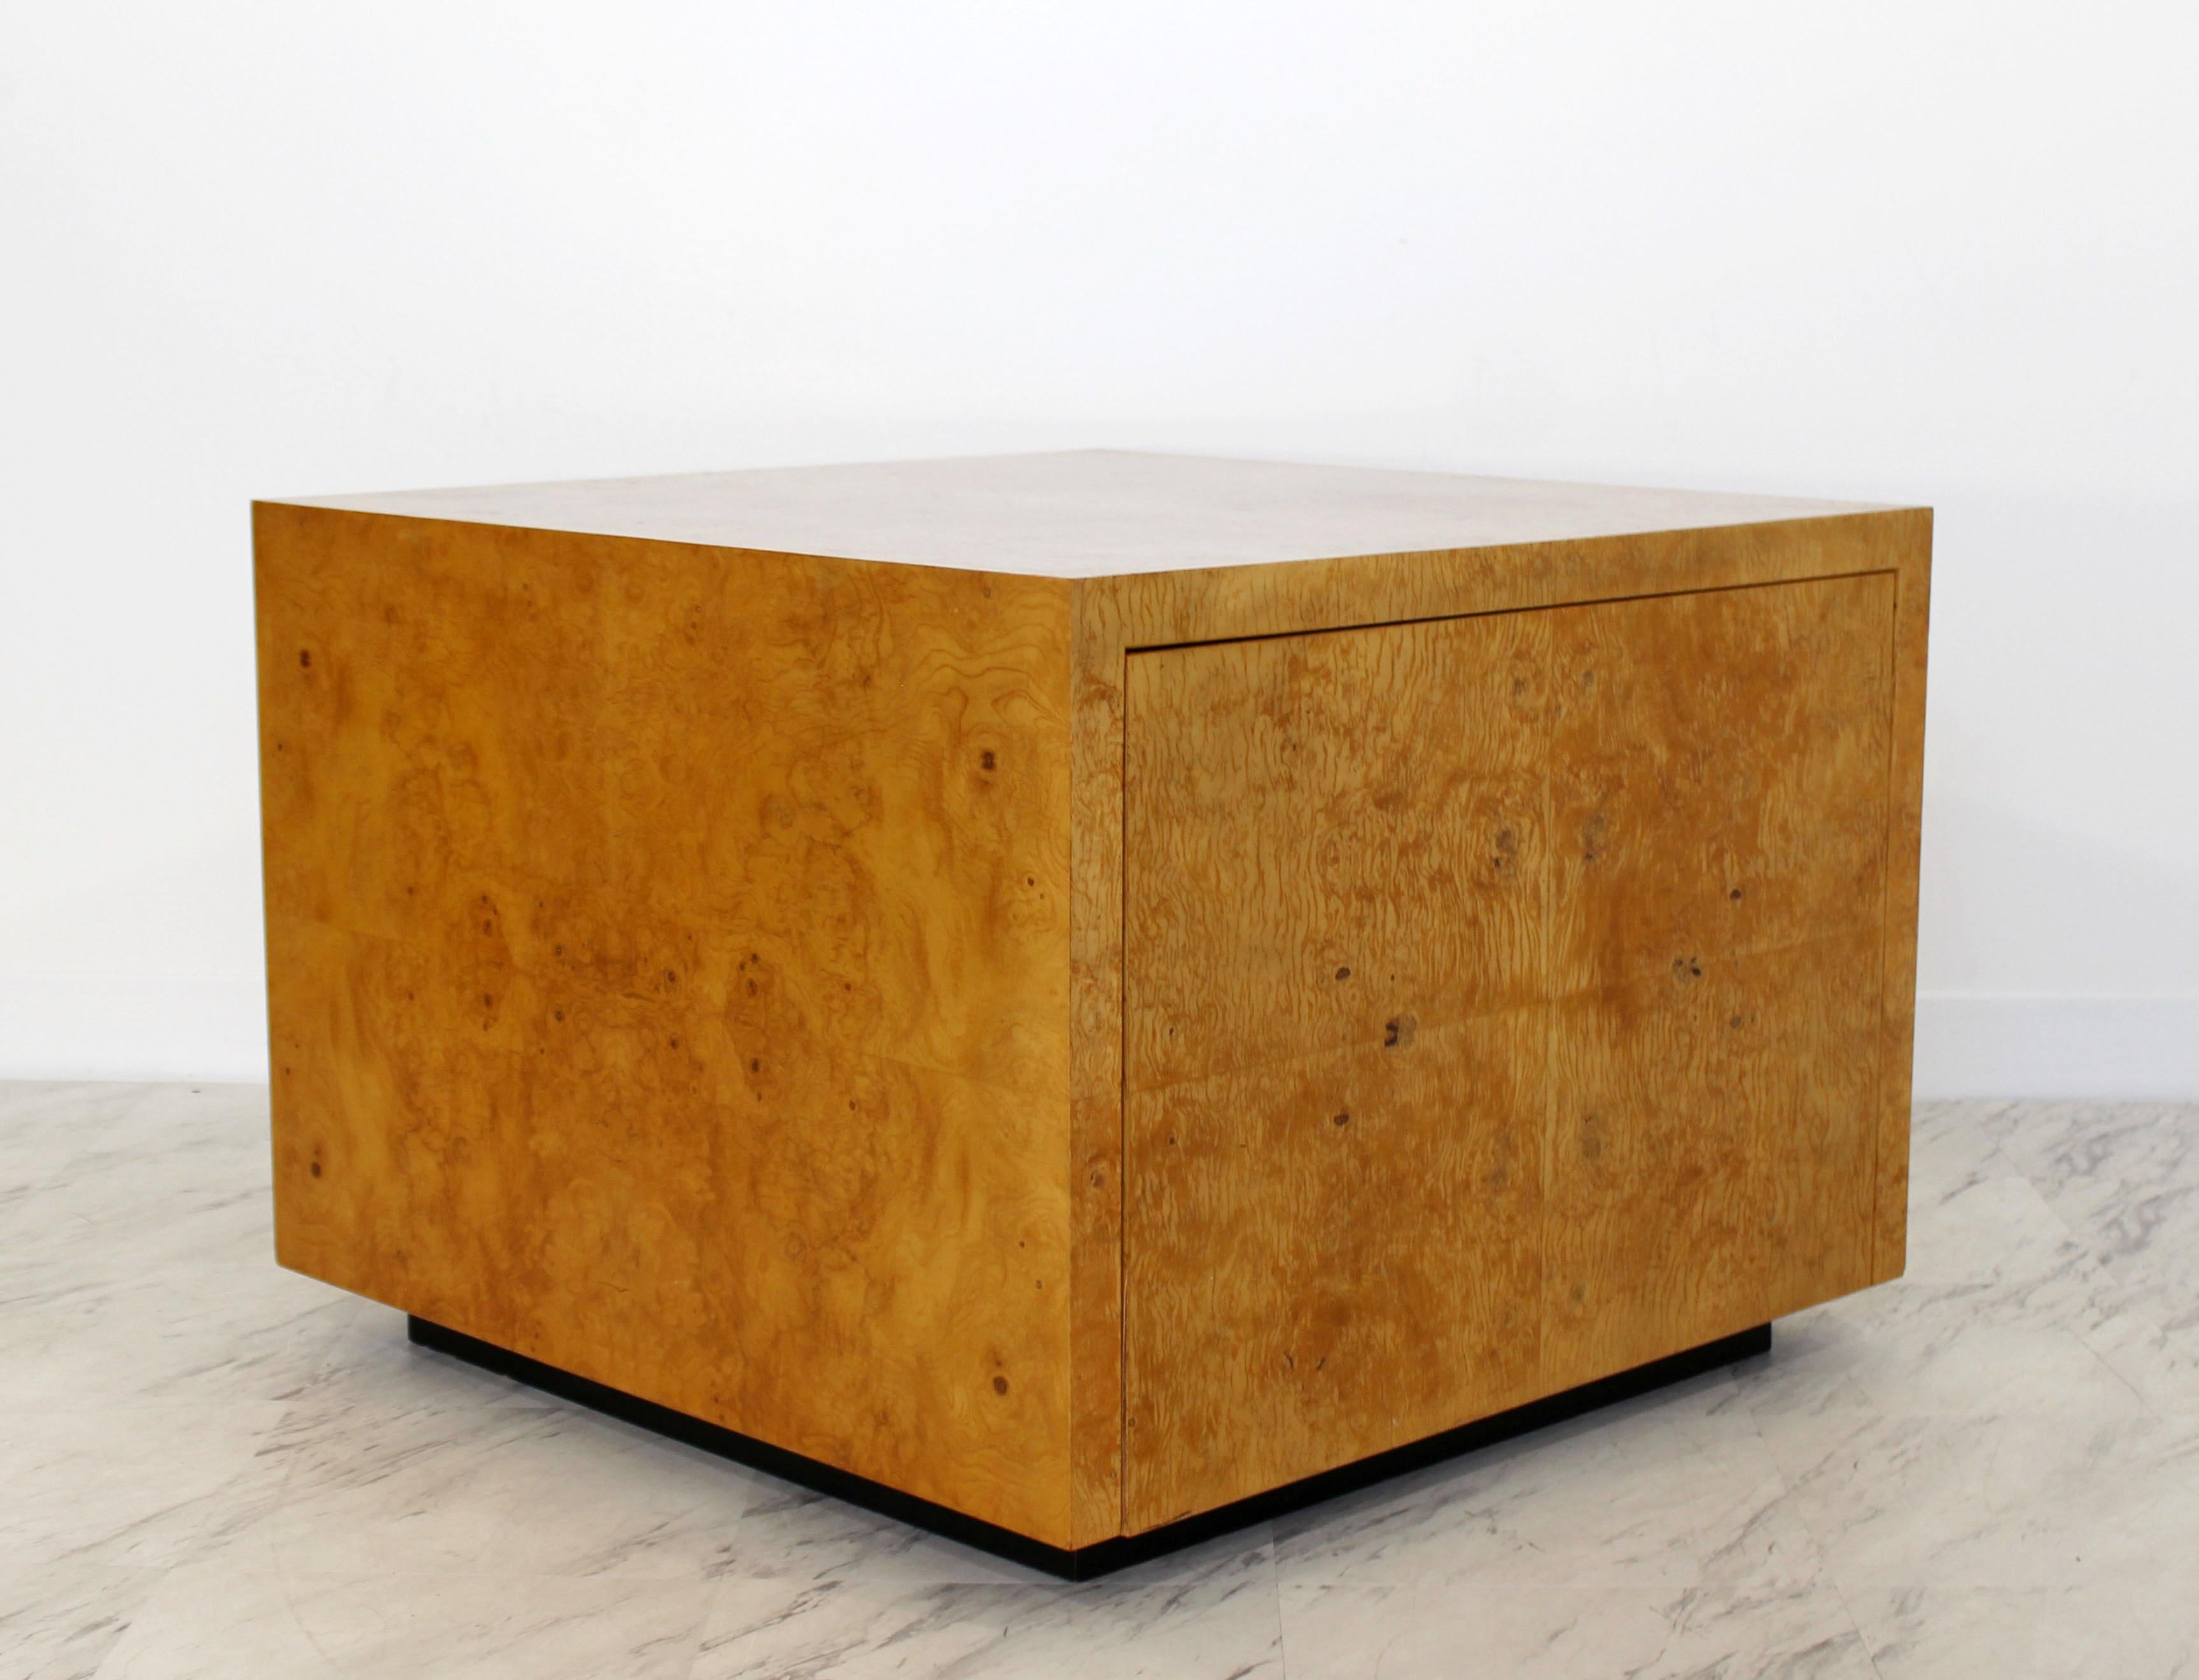 For your consideration is a fantastic, square, burl wood side table, with a push-in door and one shelf, by Milo Baughman, circa the 1970s. Can also be used as a coffee table. In very good condition. The dimensions are 30